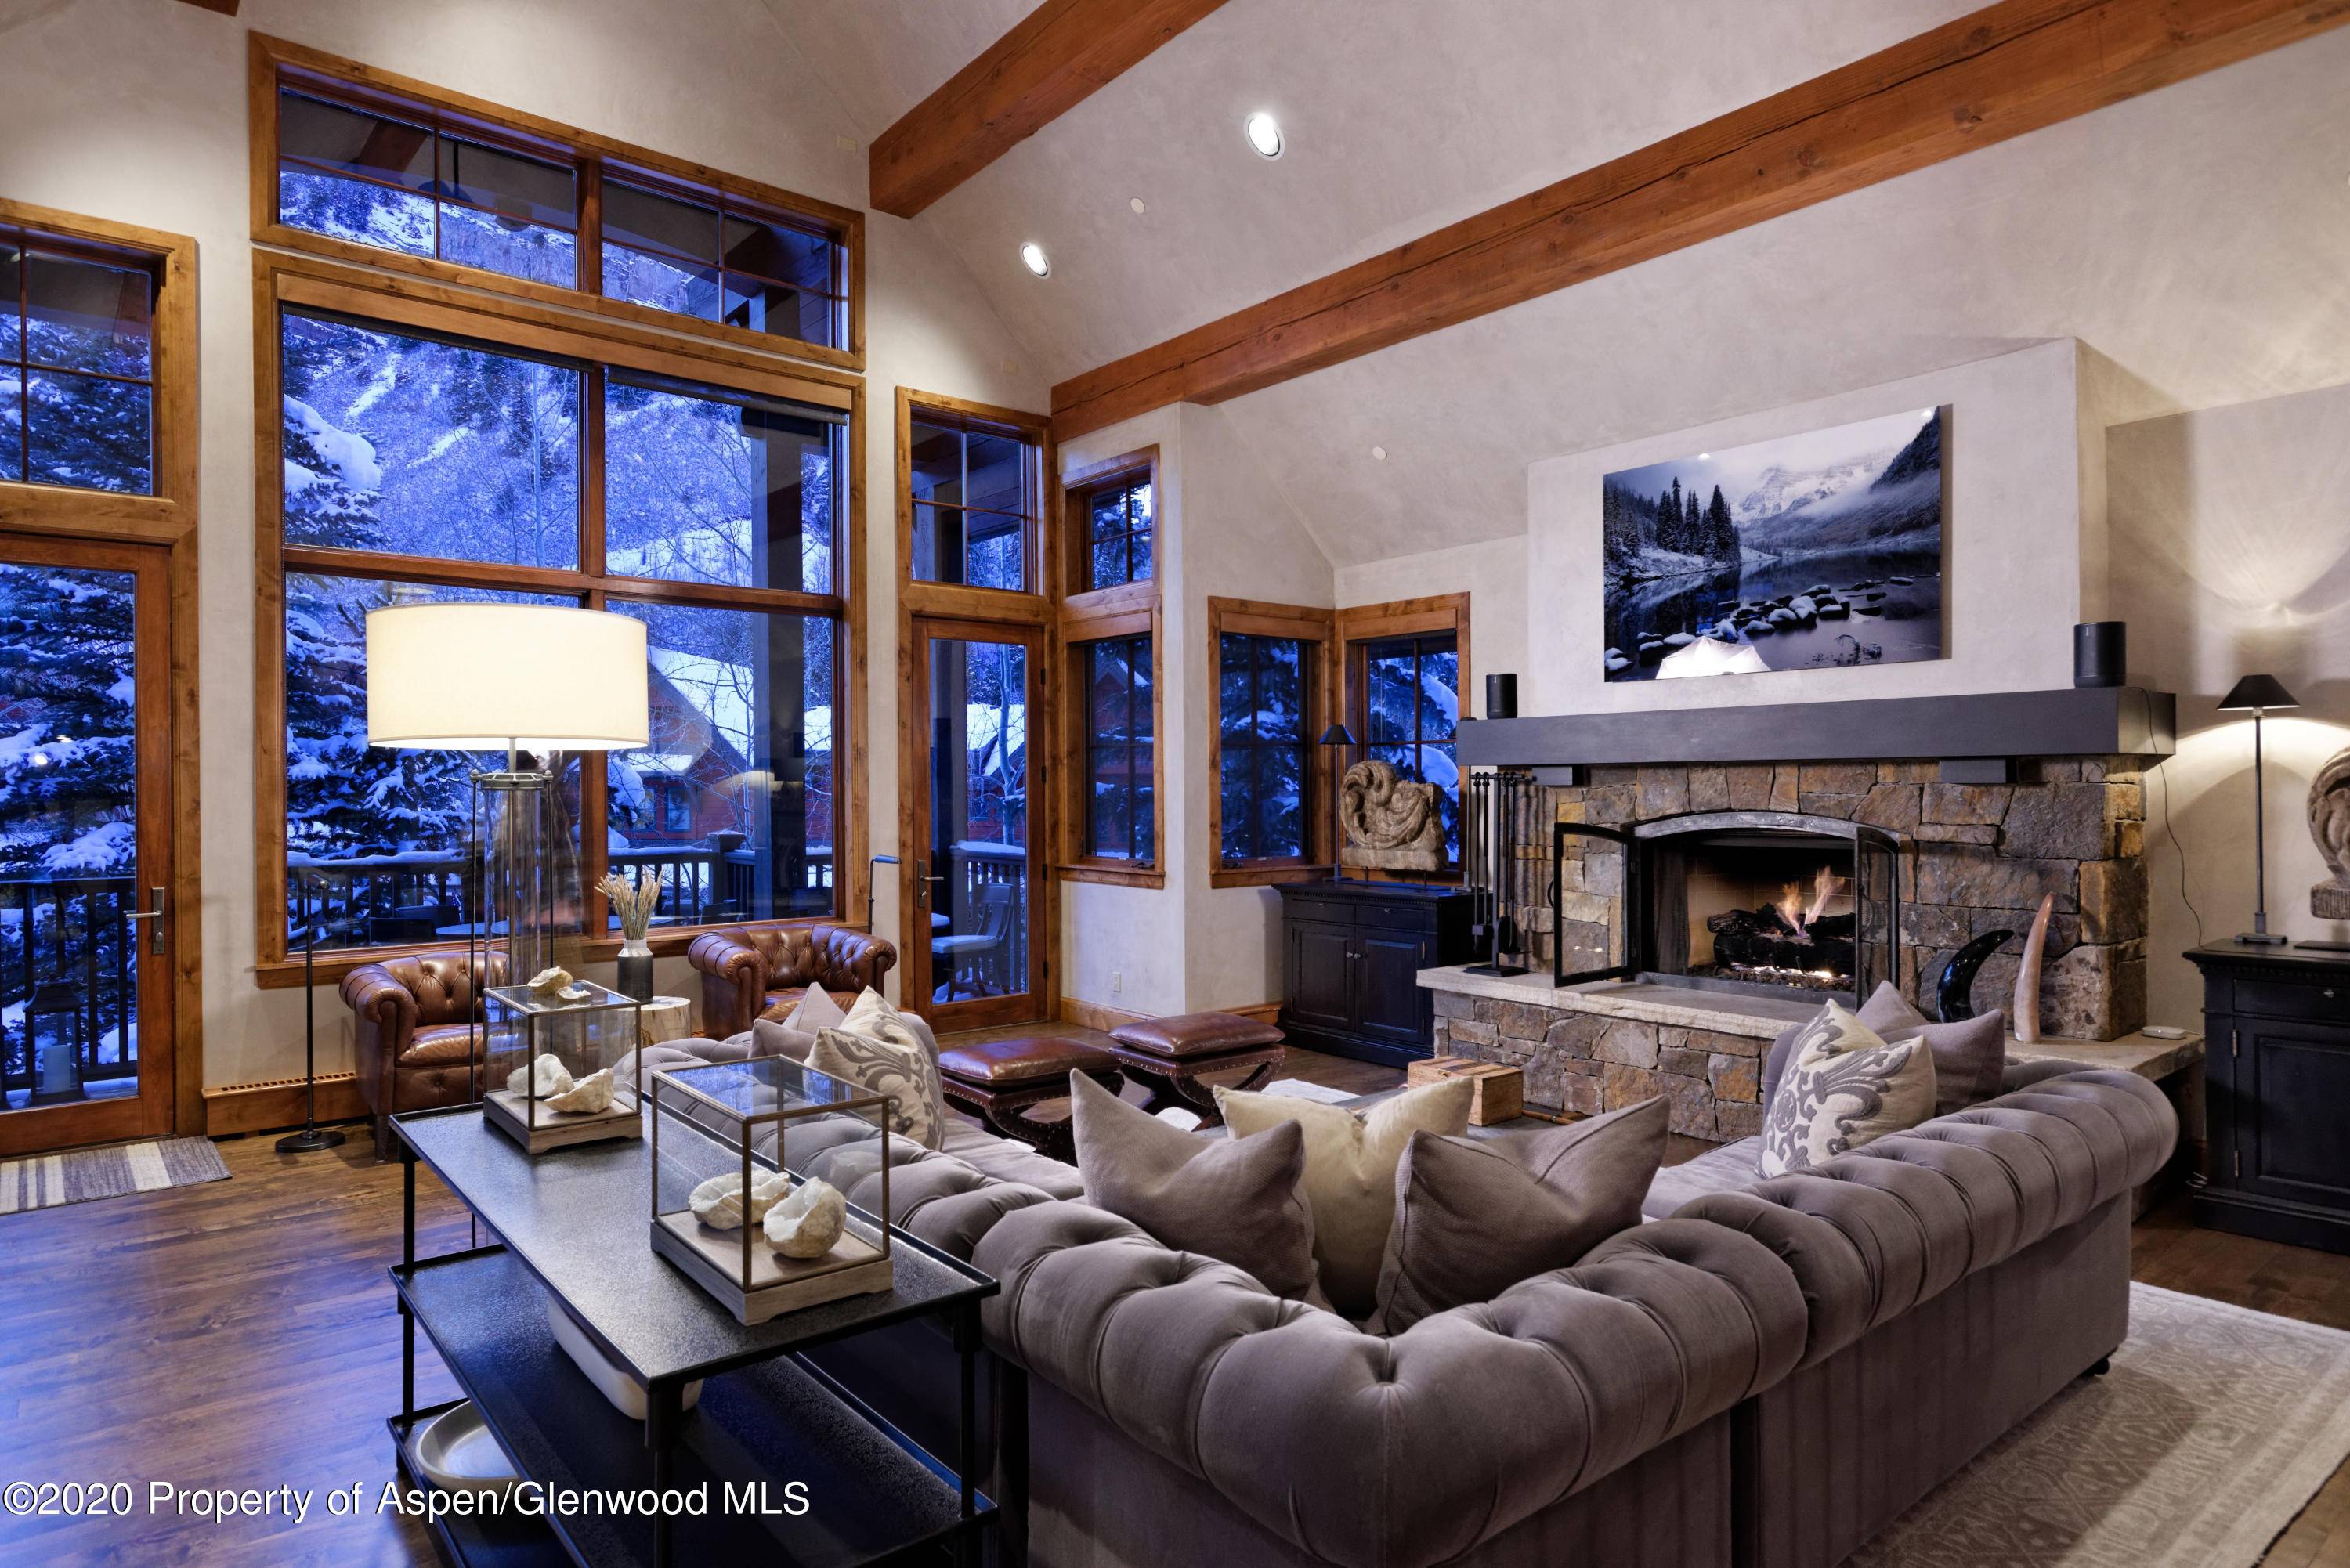 Aspen Highland's ski in ski out luxury townhome features five ensuite bedrooms and two separate entertaining areas.